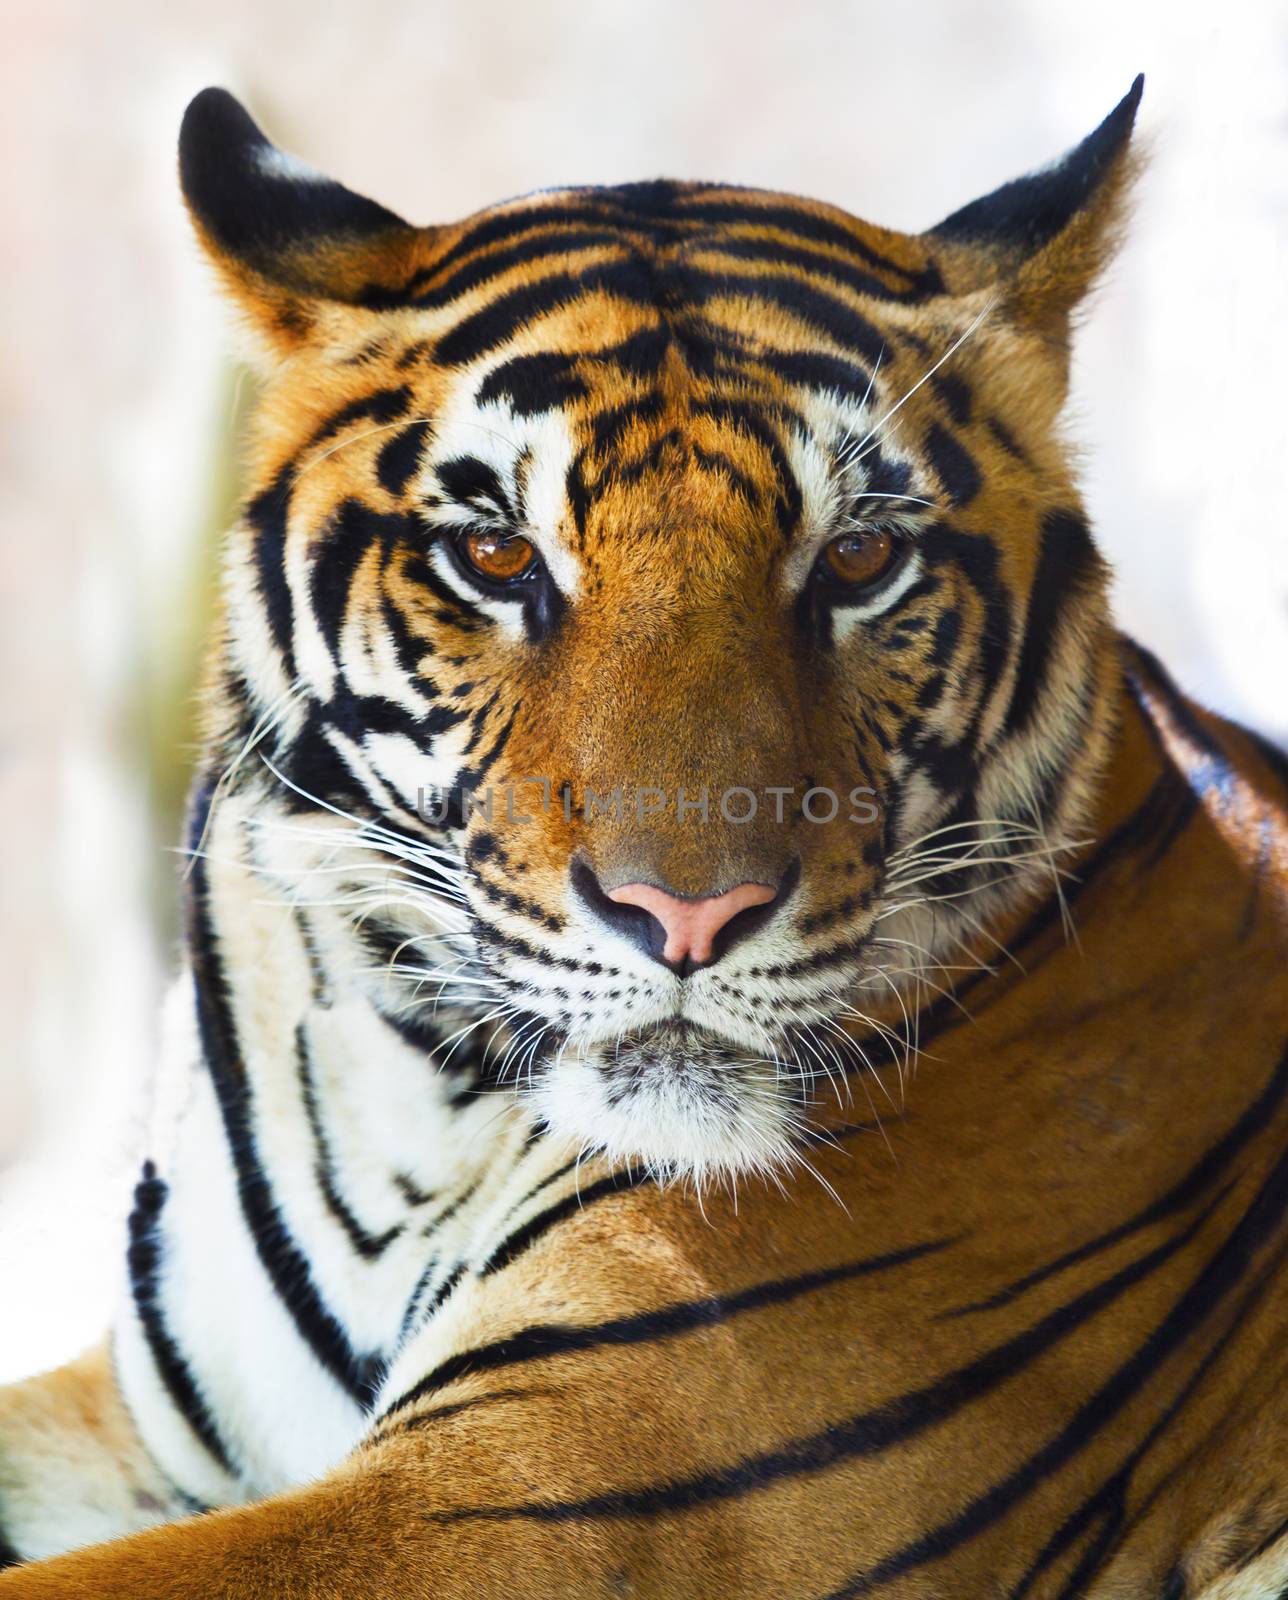 close up face of indo chinese tiger face  by khunaspix